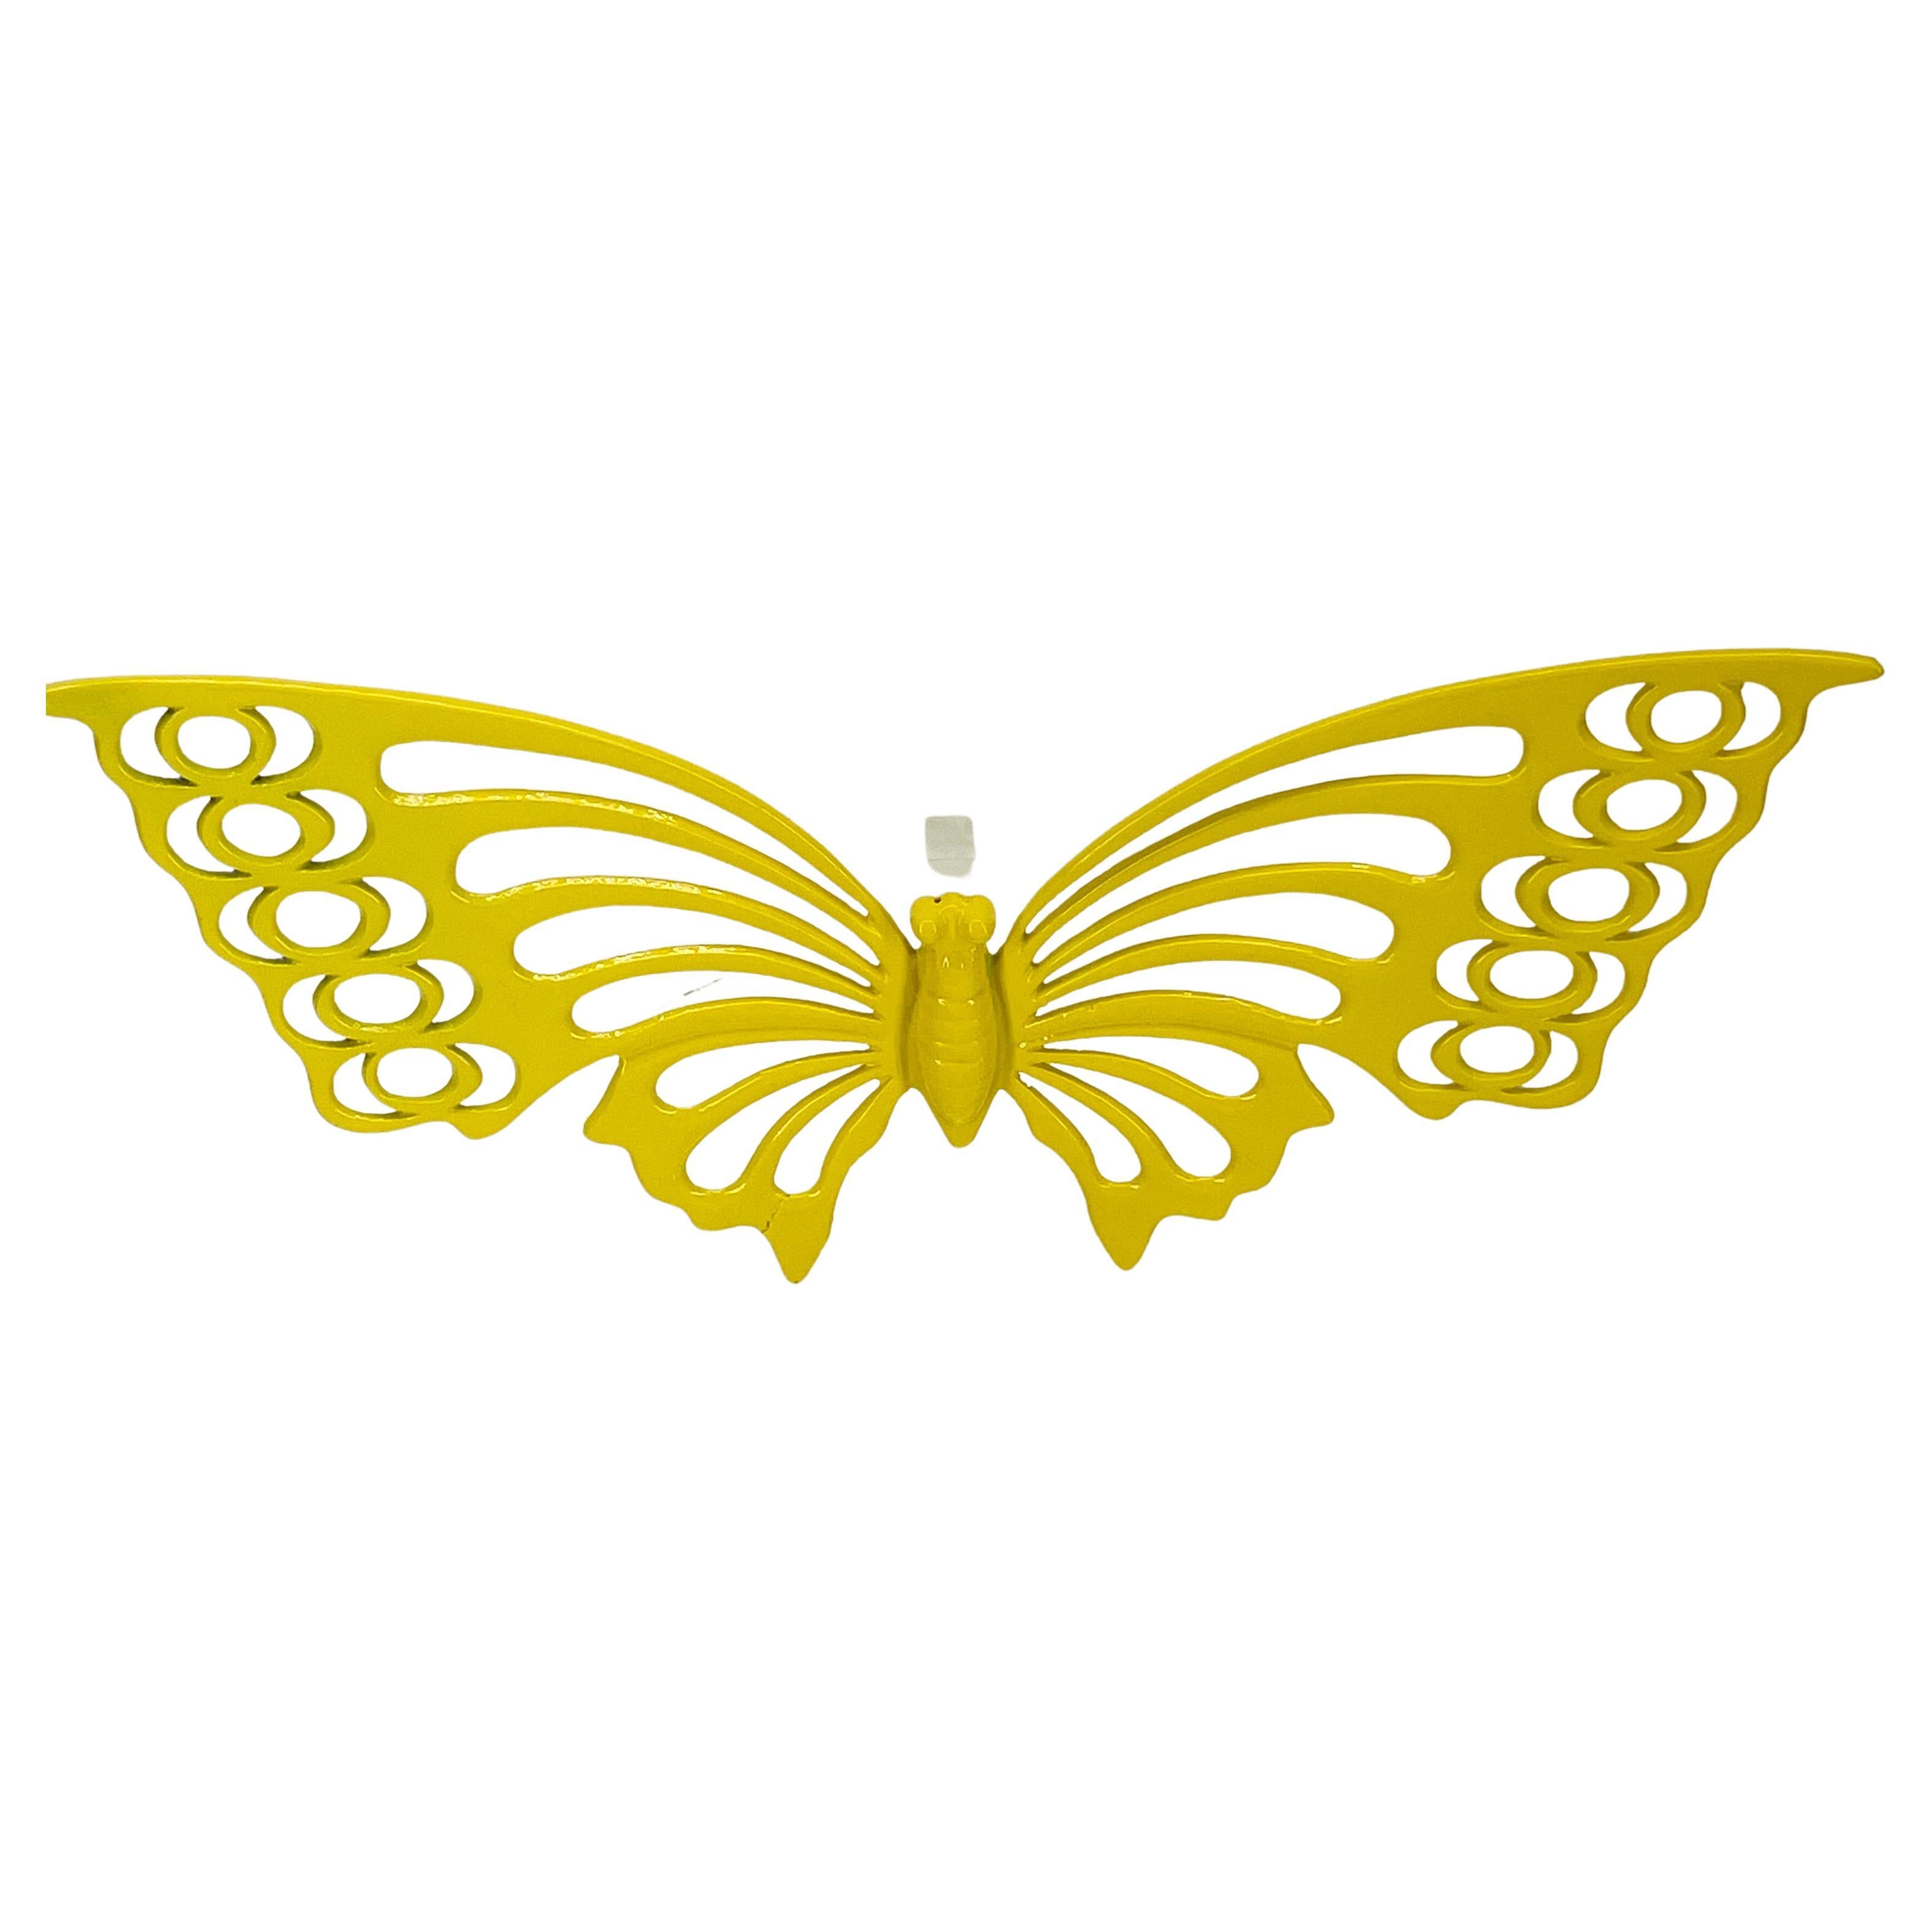 Mid-Century Modern Large Brass Midcentury Butterfly Sculpture in Bright Yellow Powder-Coat For Sale